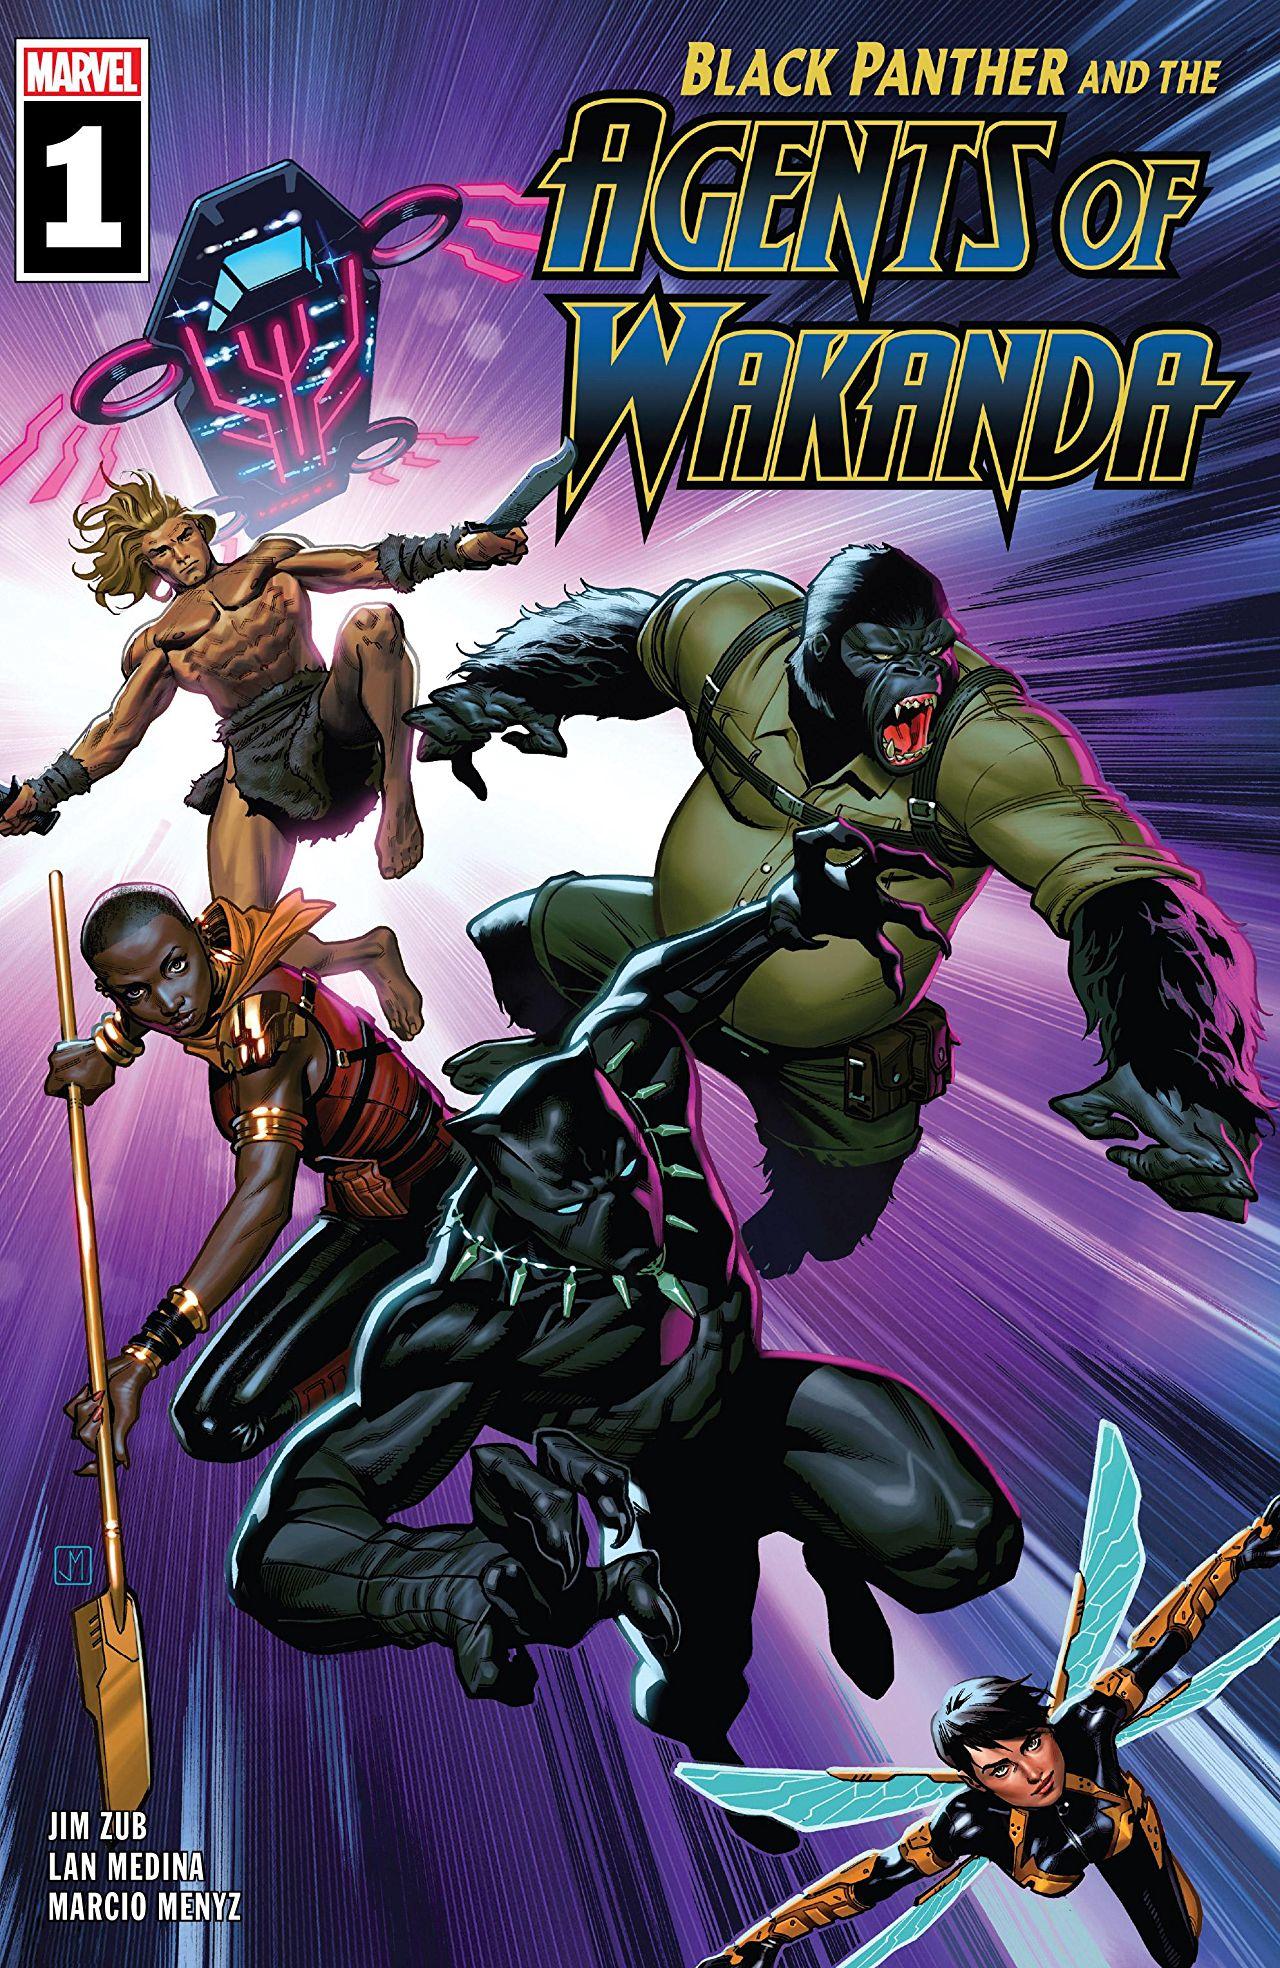 Black Panther and the Agents of Wakanda Vol. 1 #1